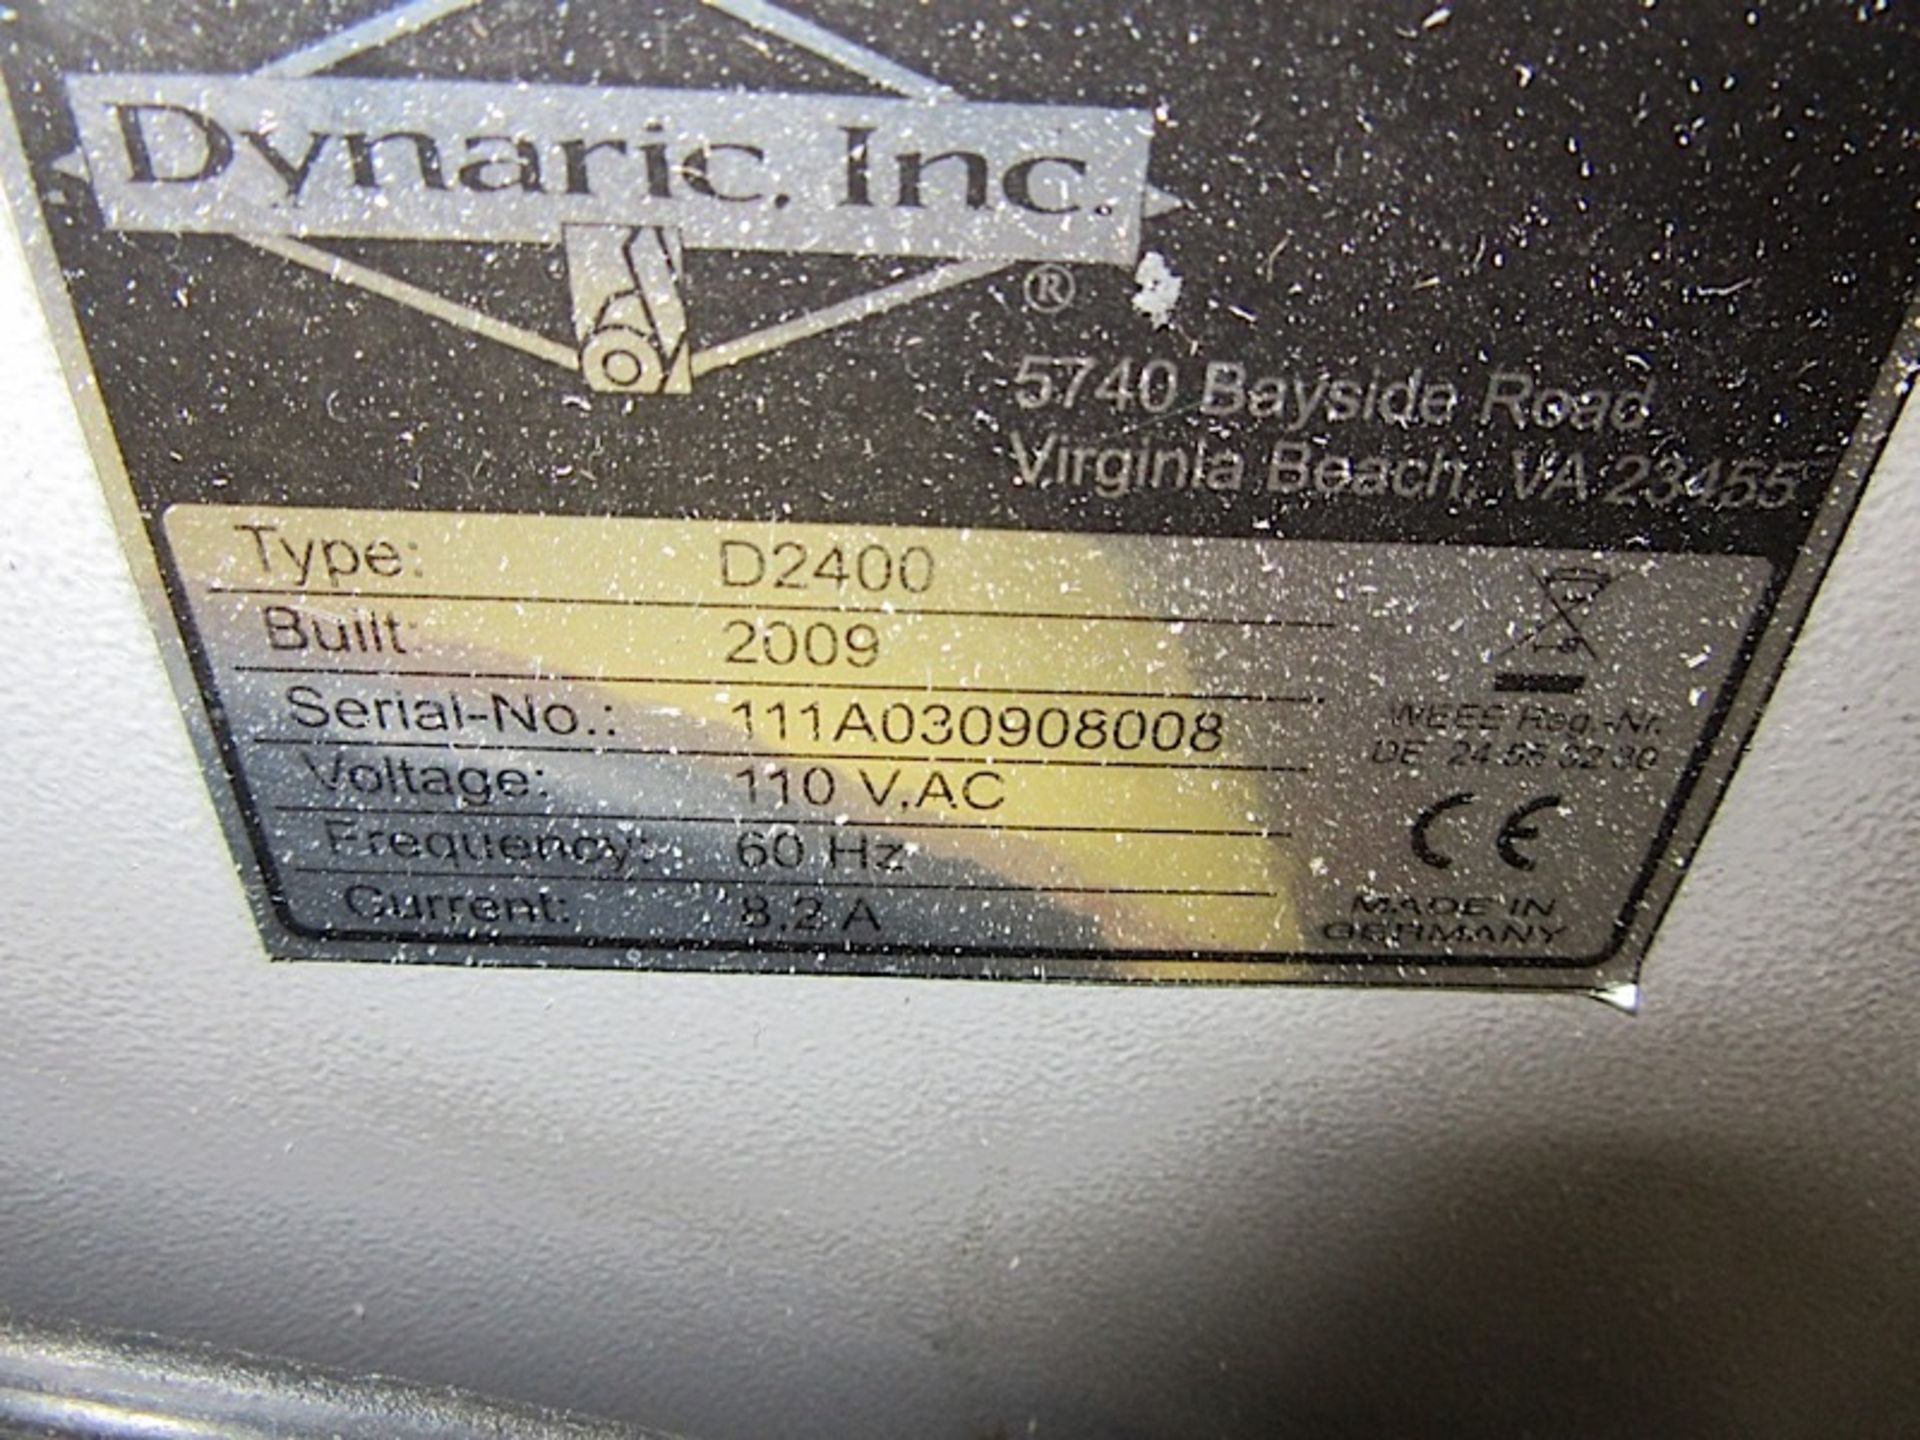 2009 DYNARIC (D2400) STRAPPING MACHINE - Image 2 of 2